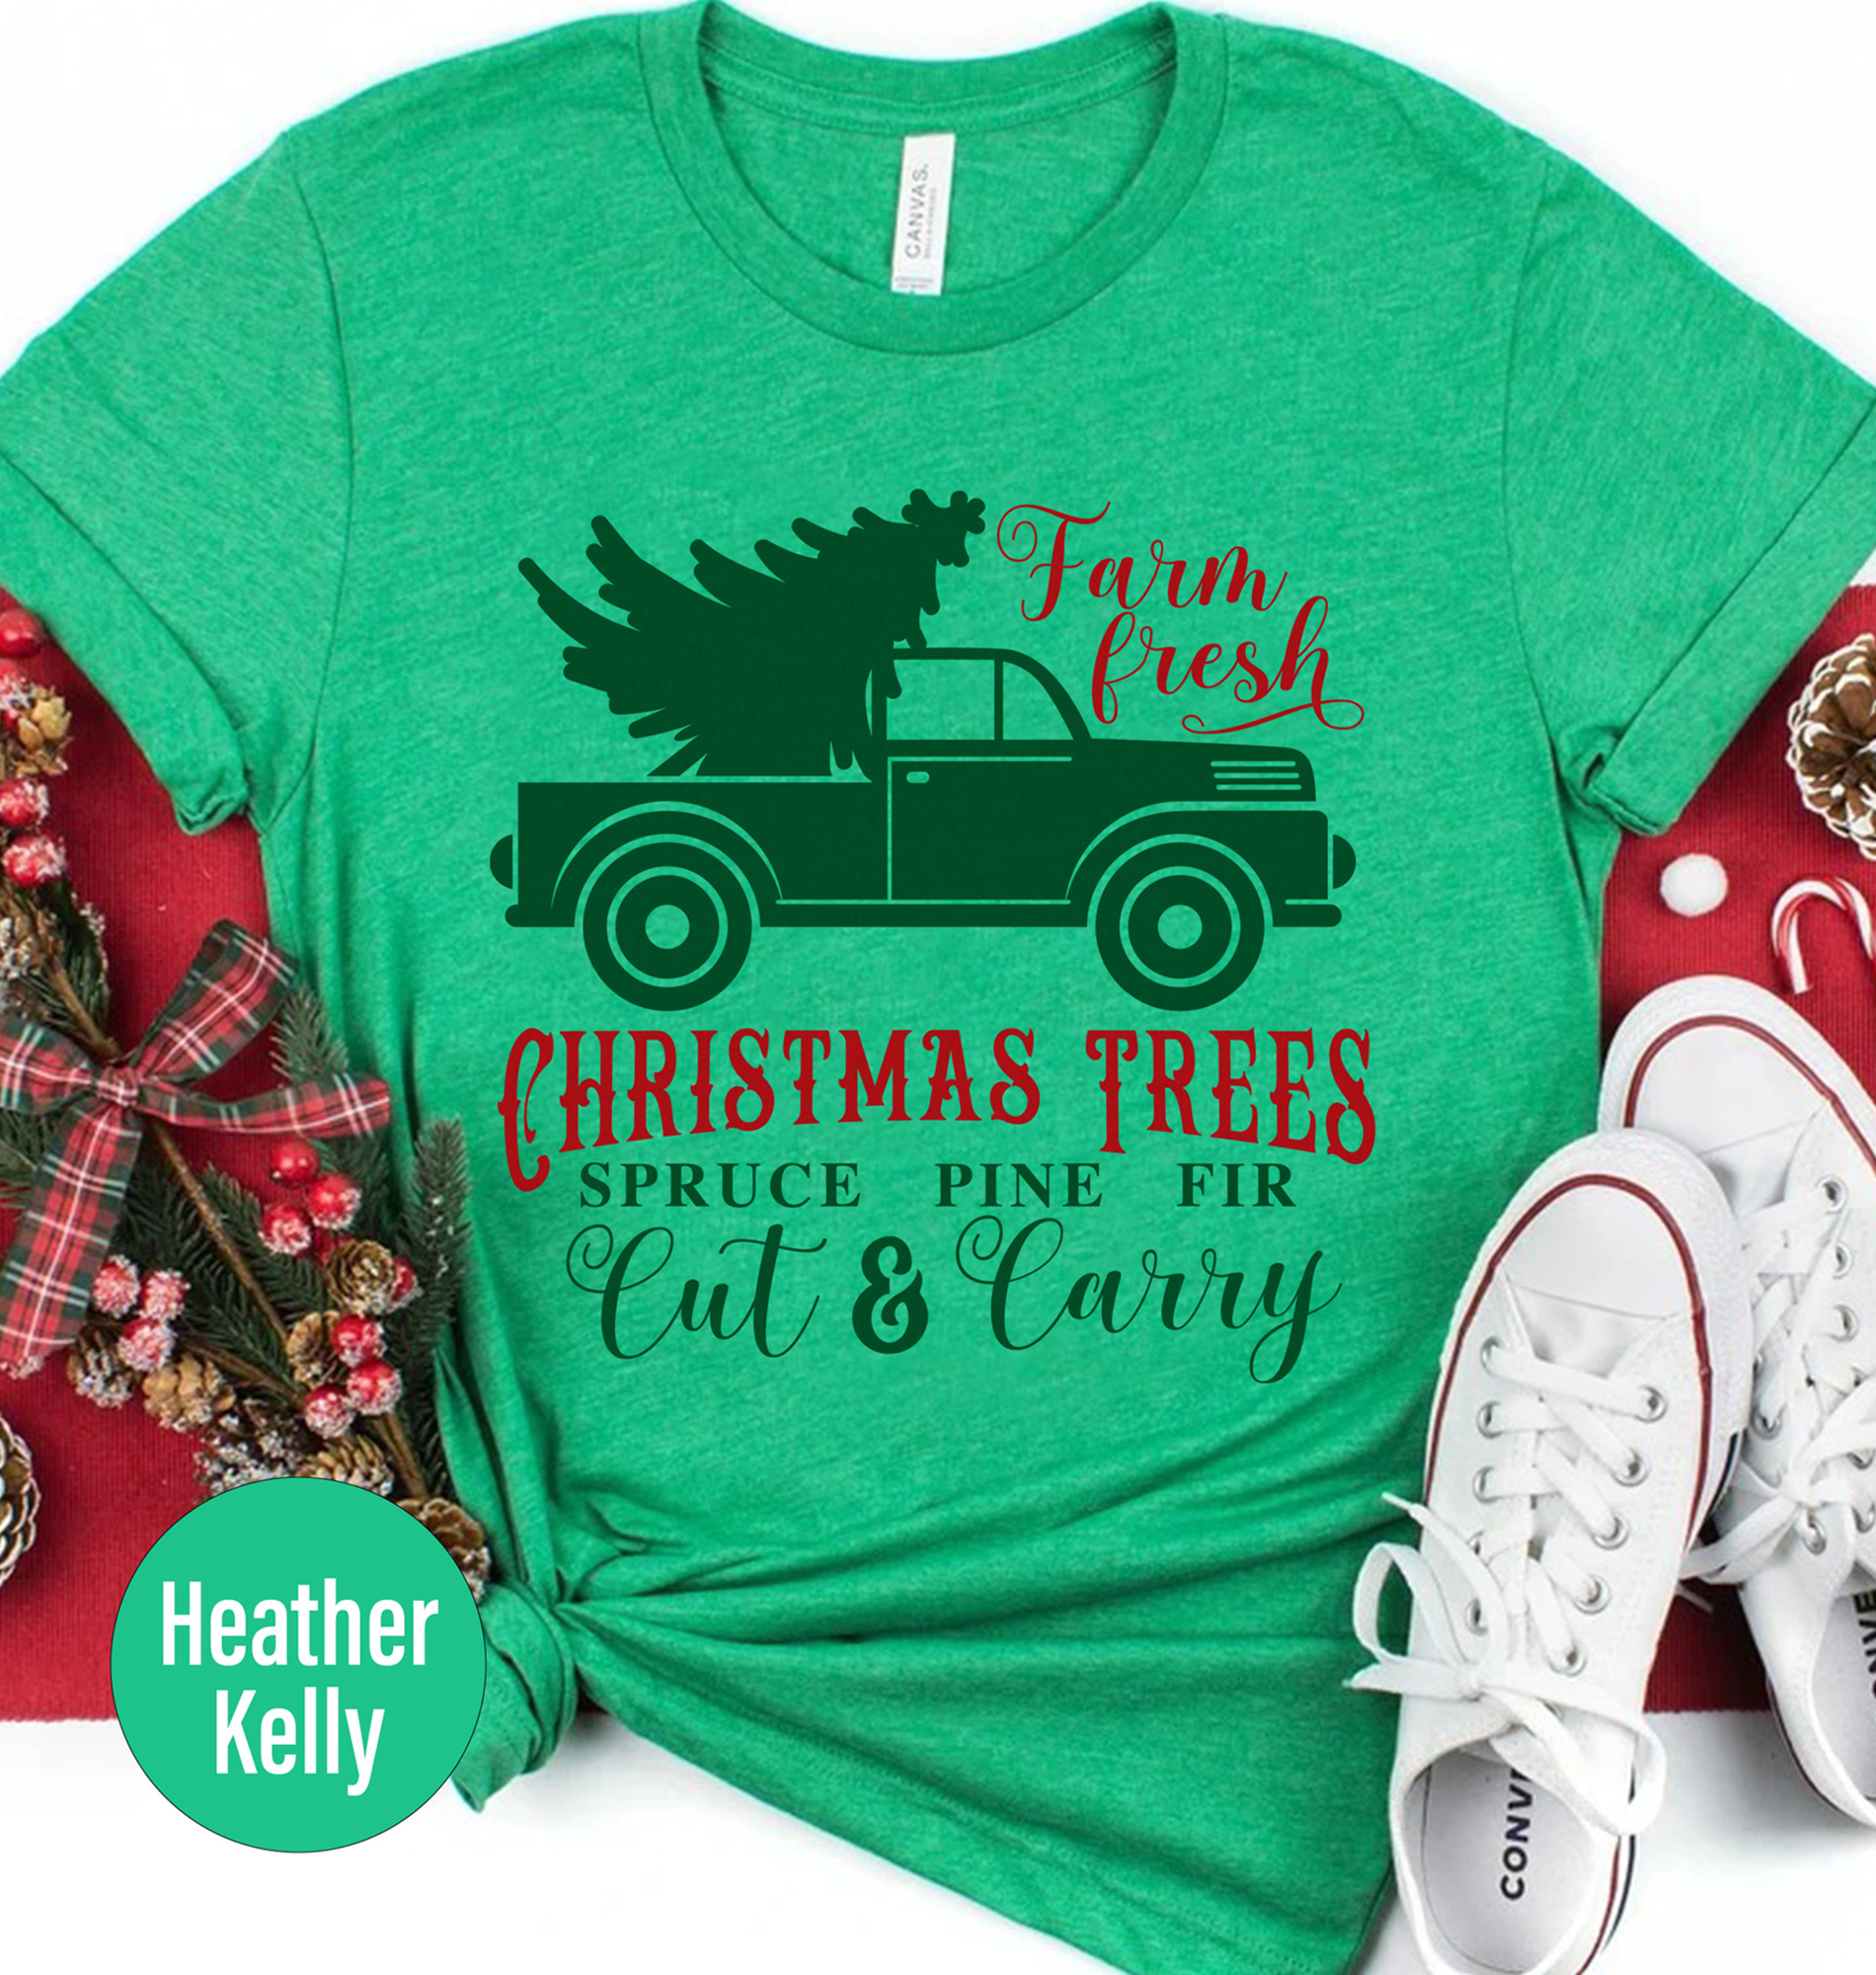 Festive Spruce Pine Fir Holiday Tee From Holidayshirts